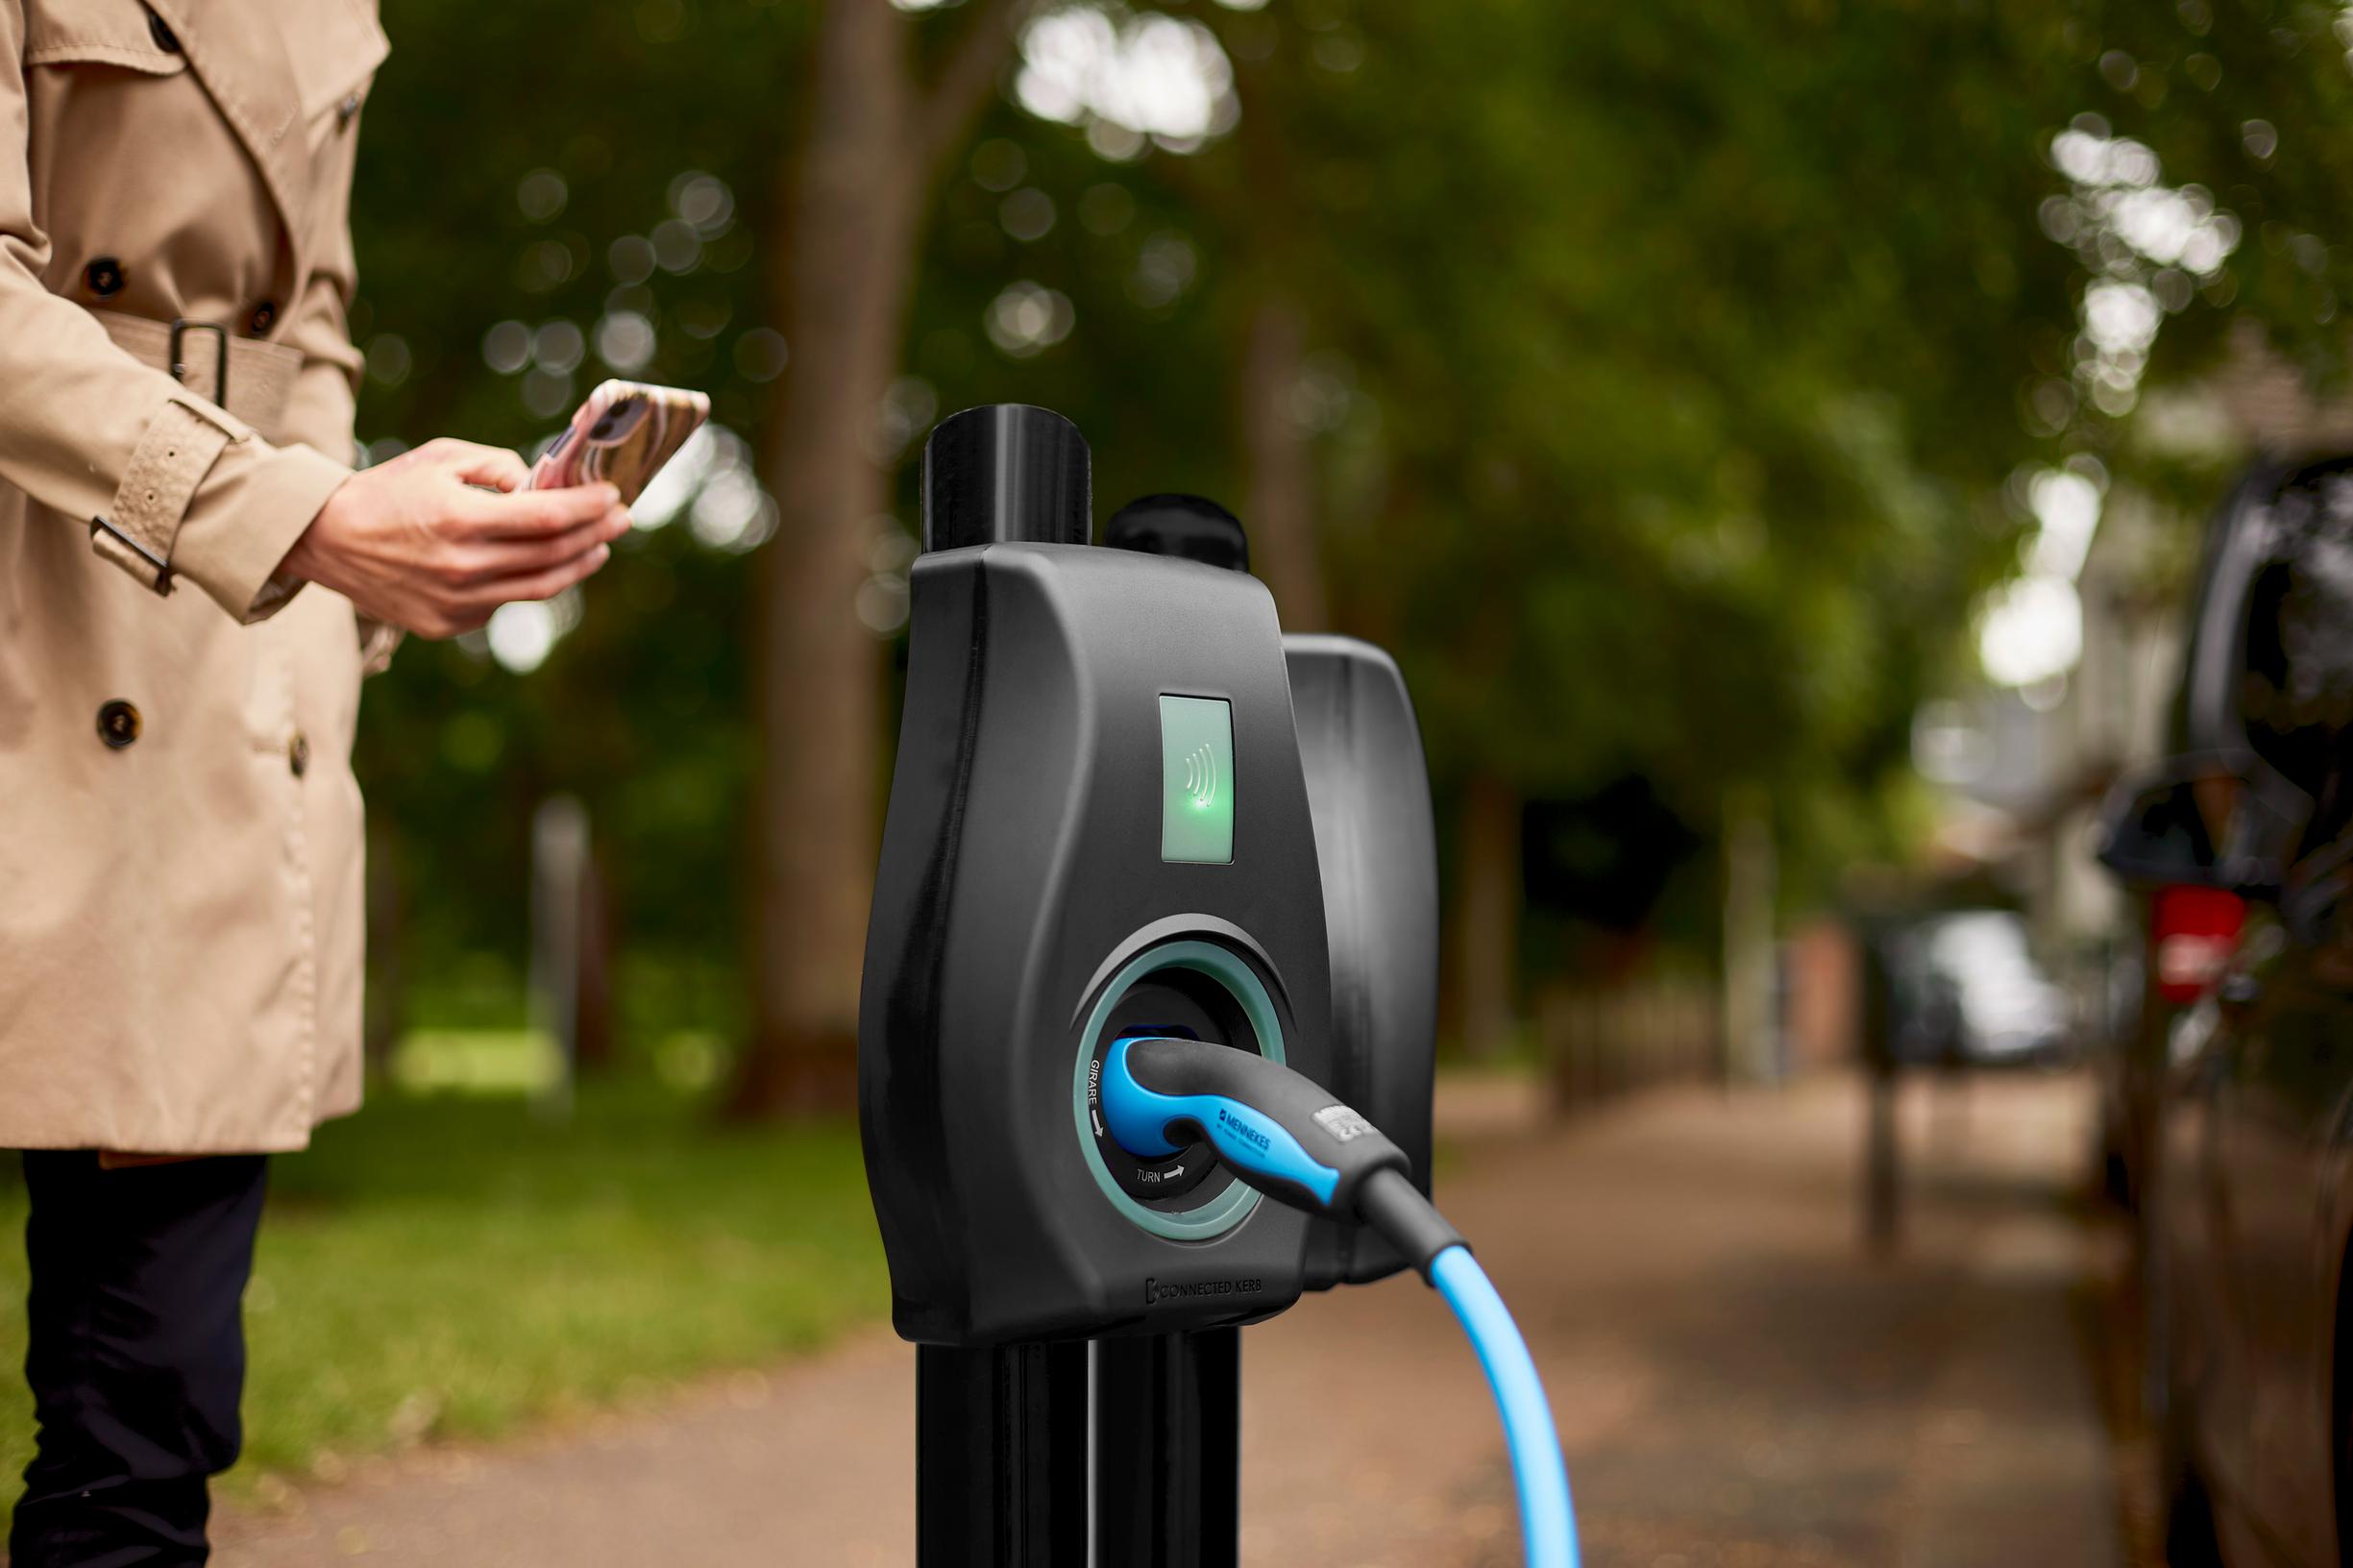 Agile Streets involved the deployment of Connected Kerb chargers